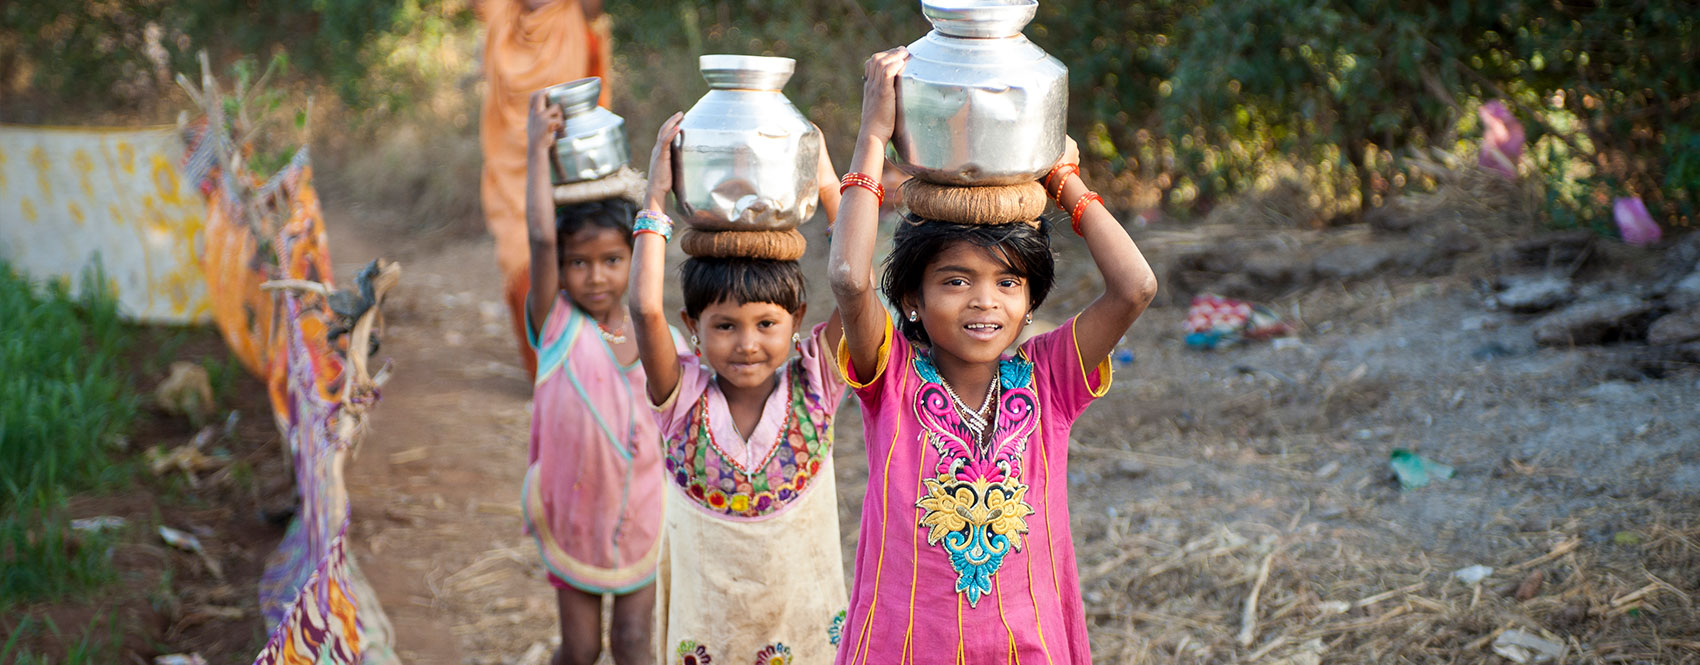 Asian girls carrying water for miles in a global clean water crisis